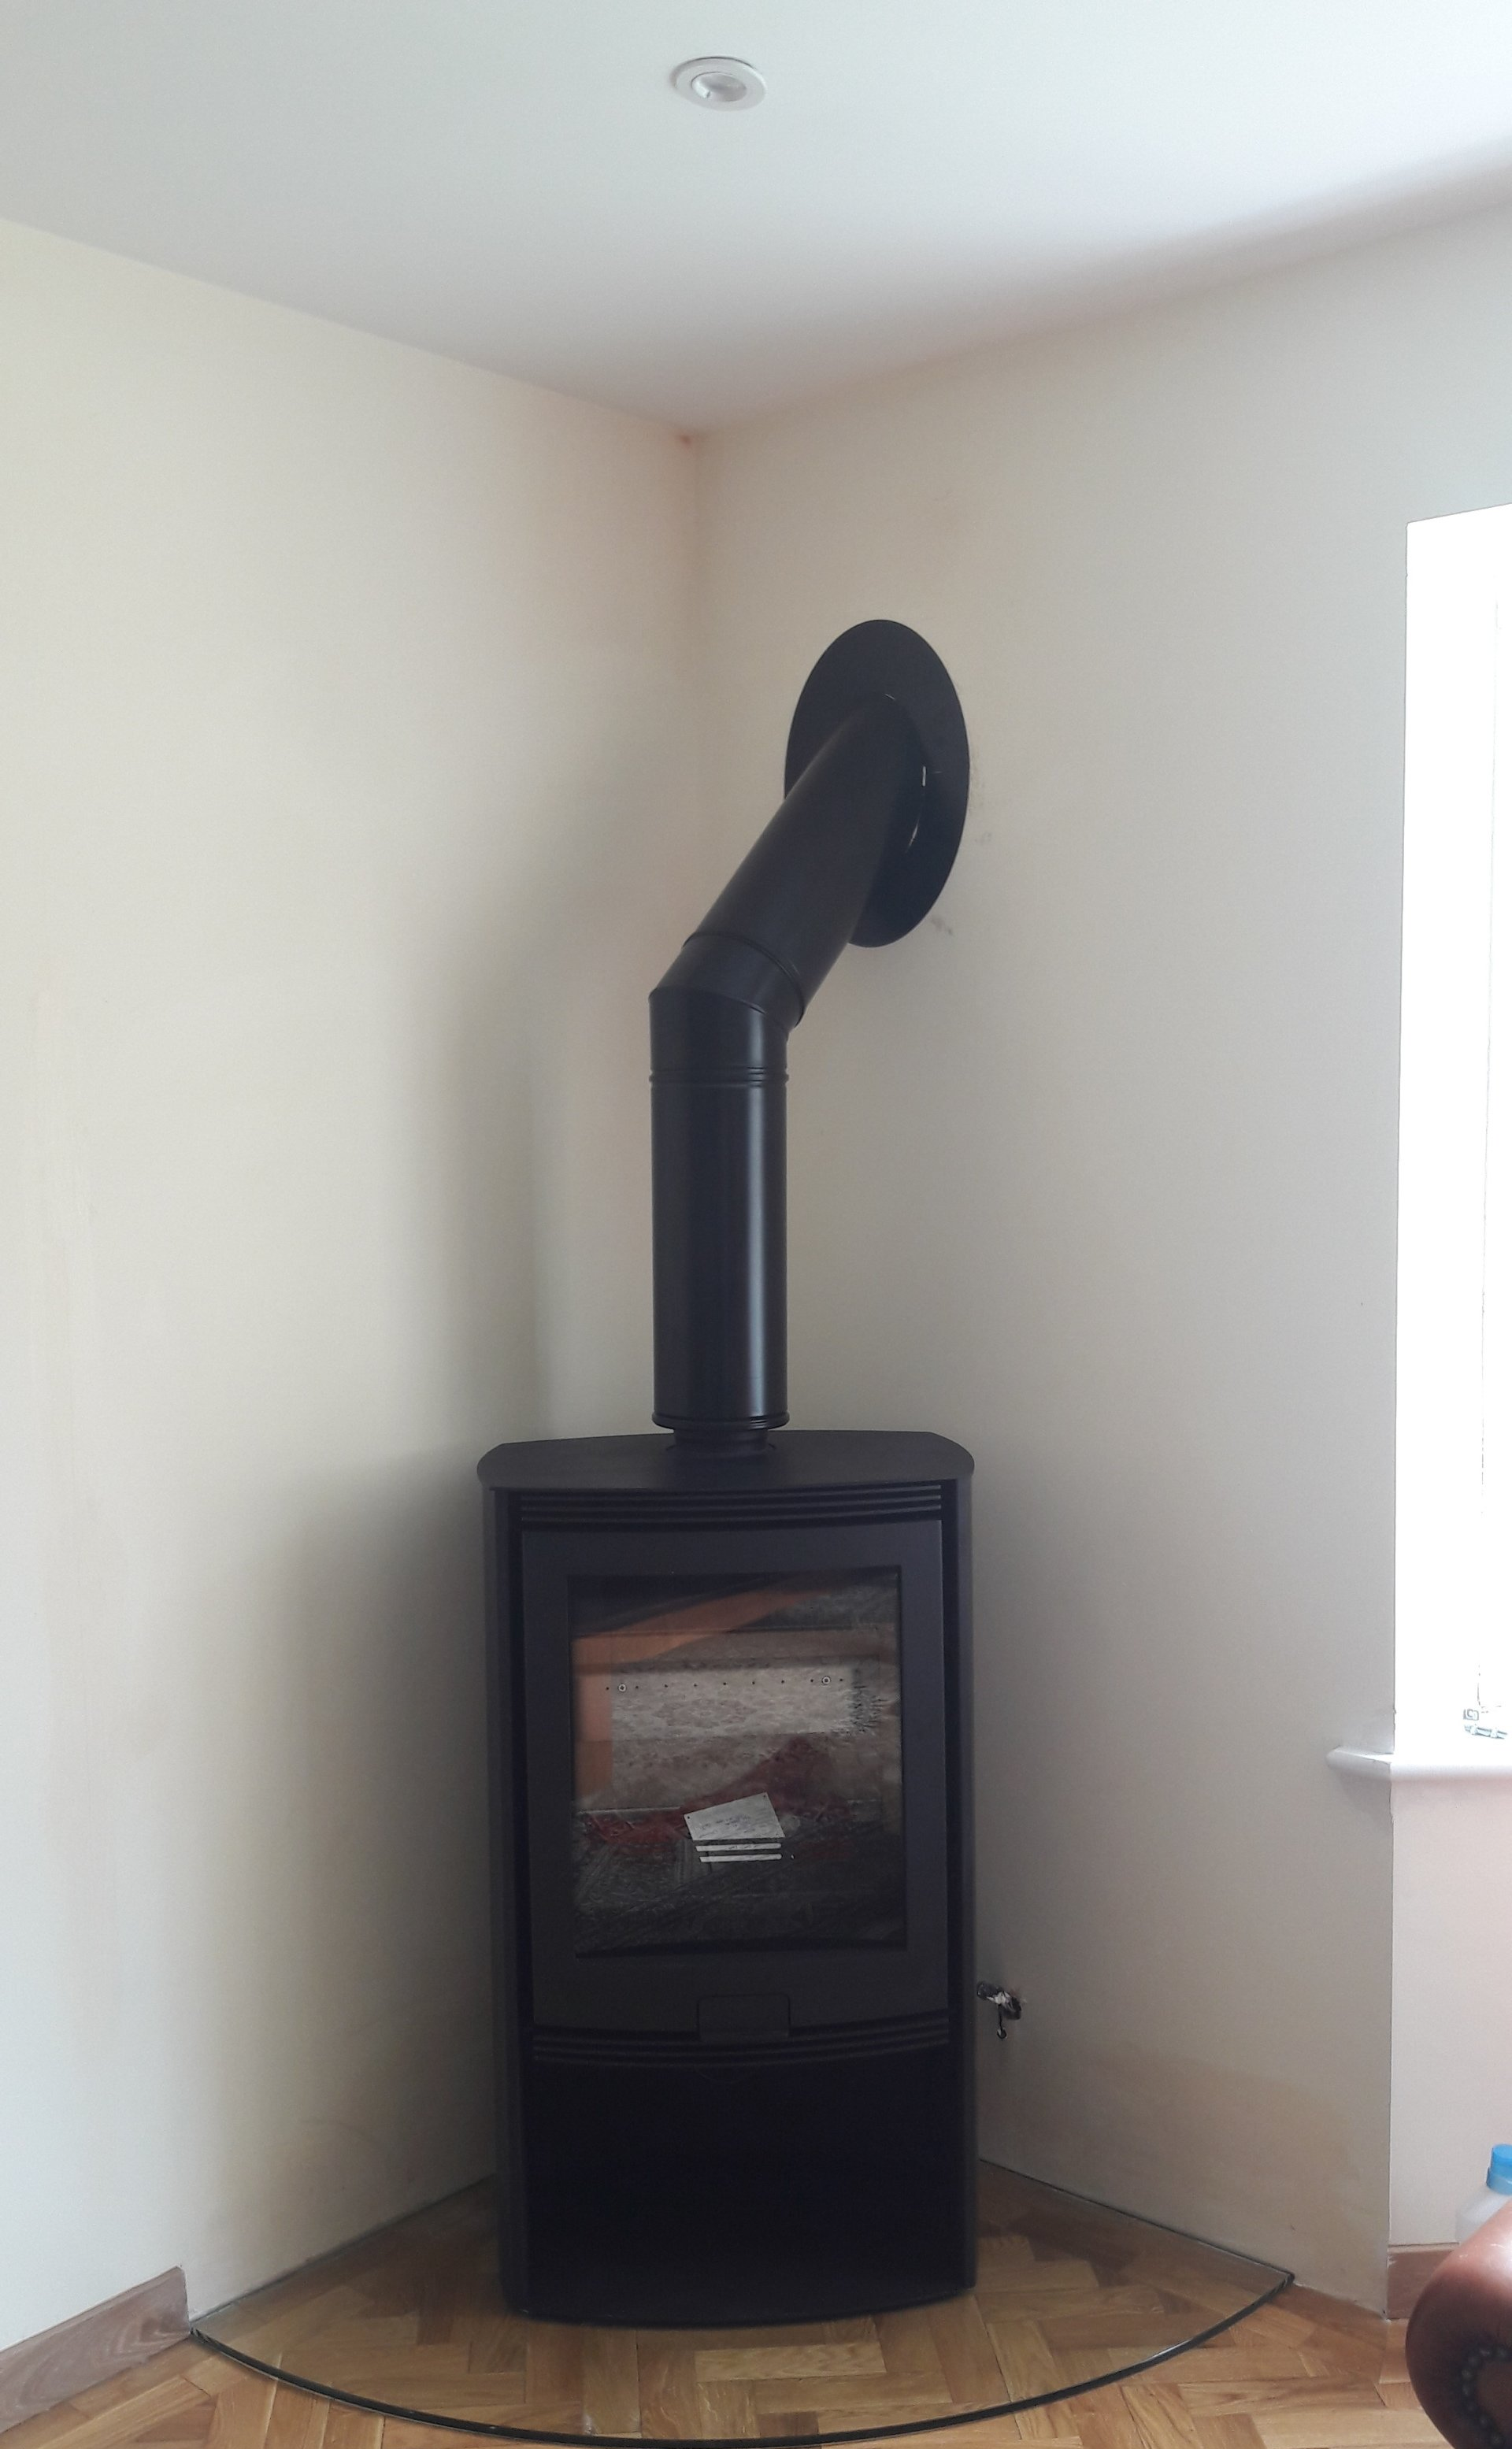 Di Lusso R5 wood burning stove with multi fuel kit on glass hearth